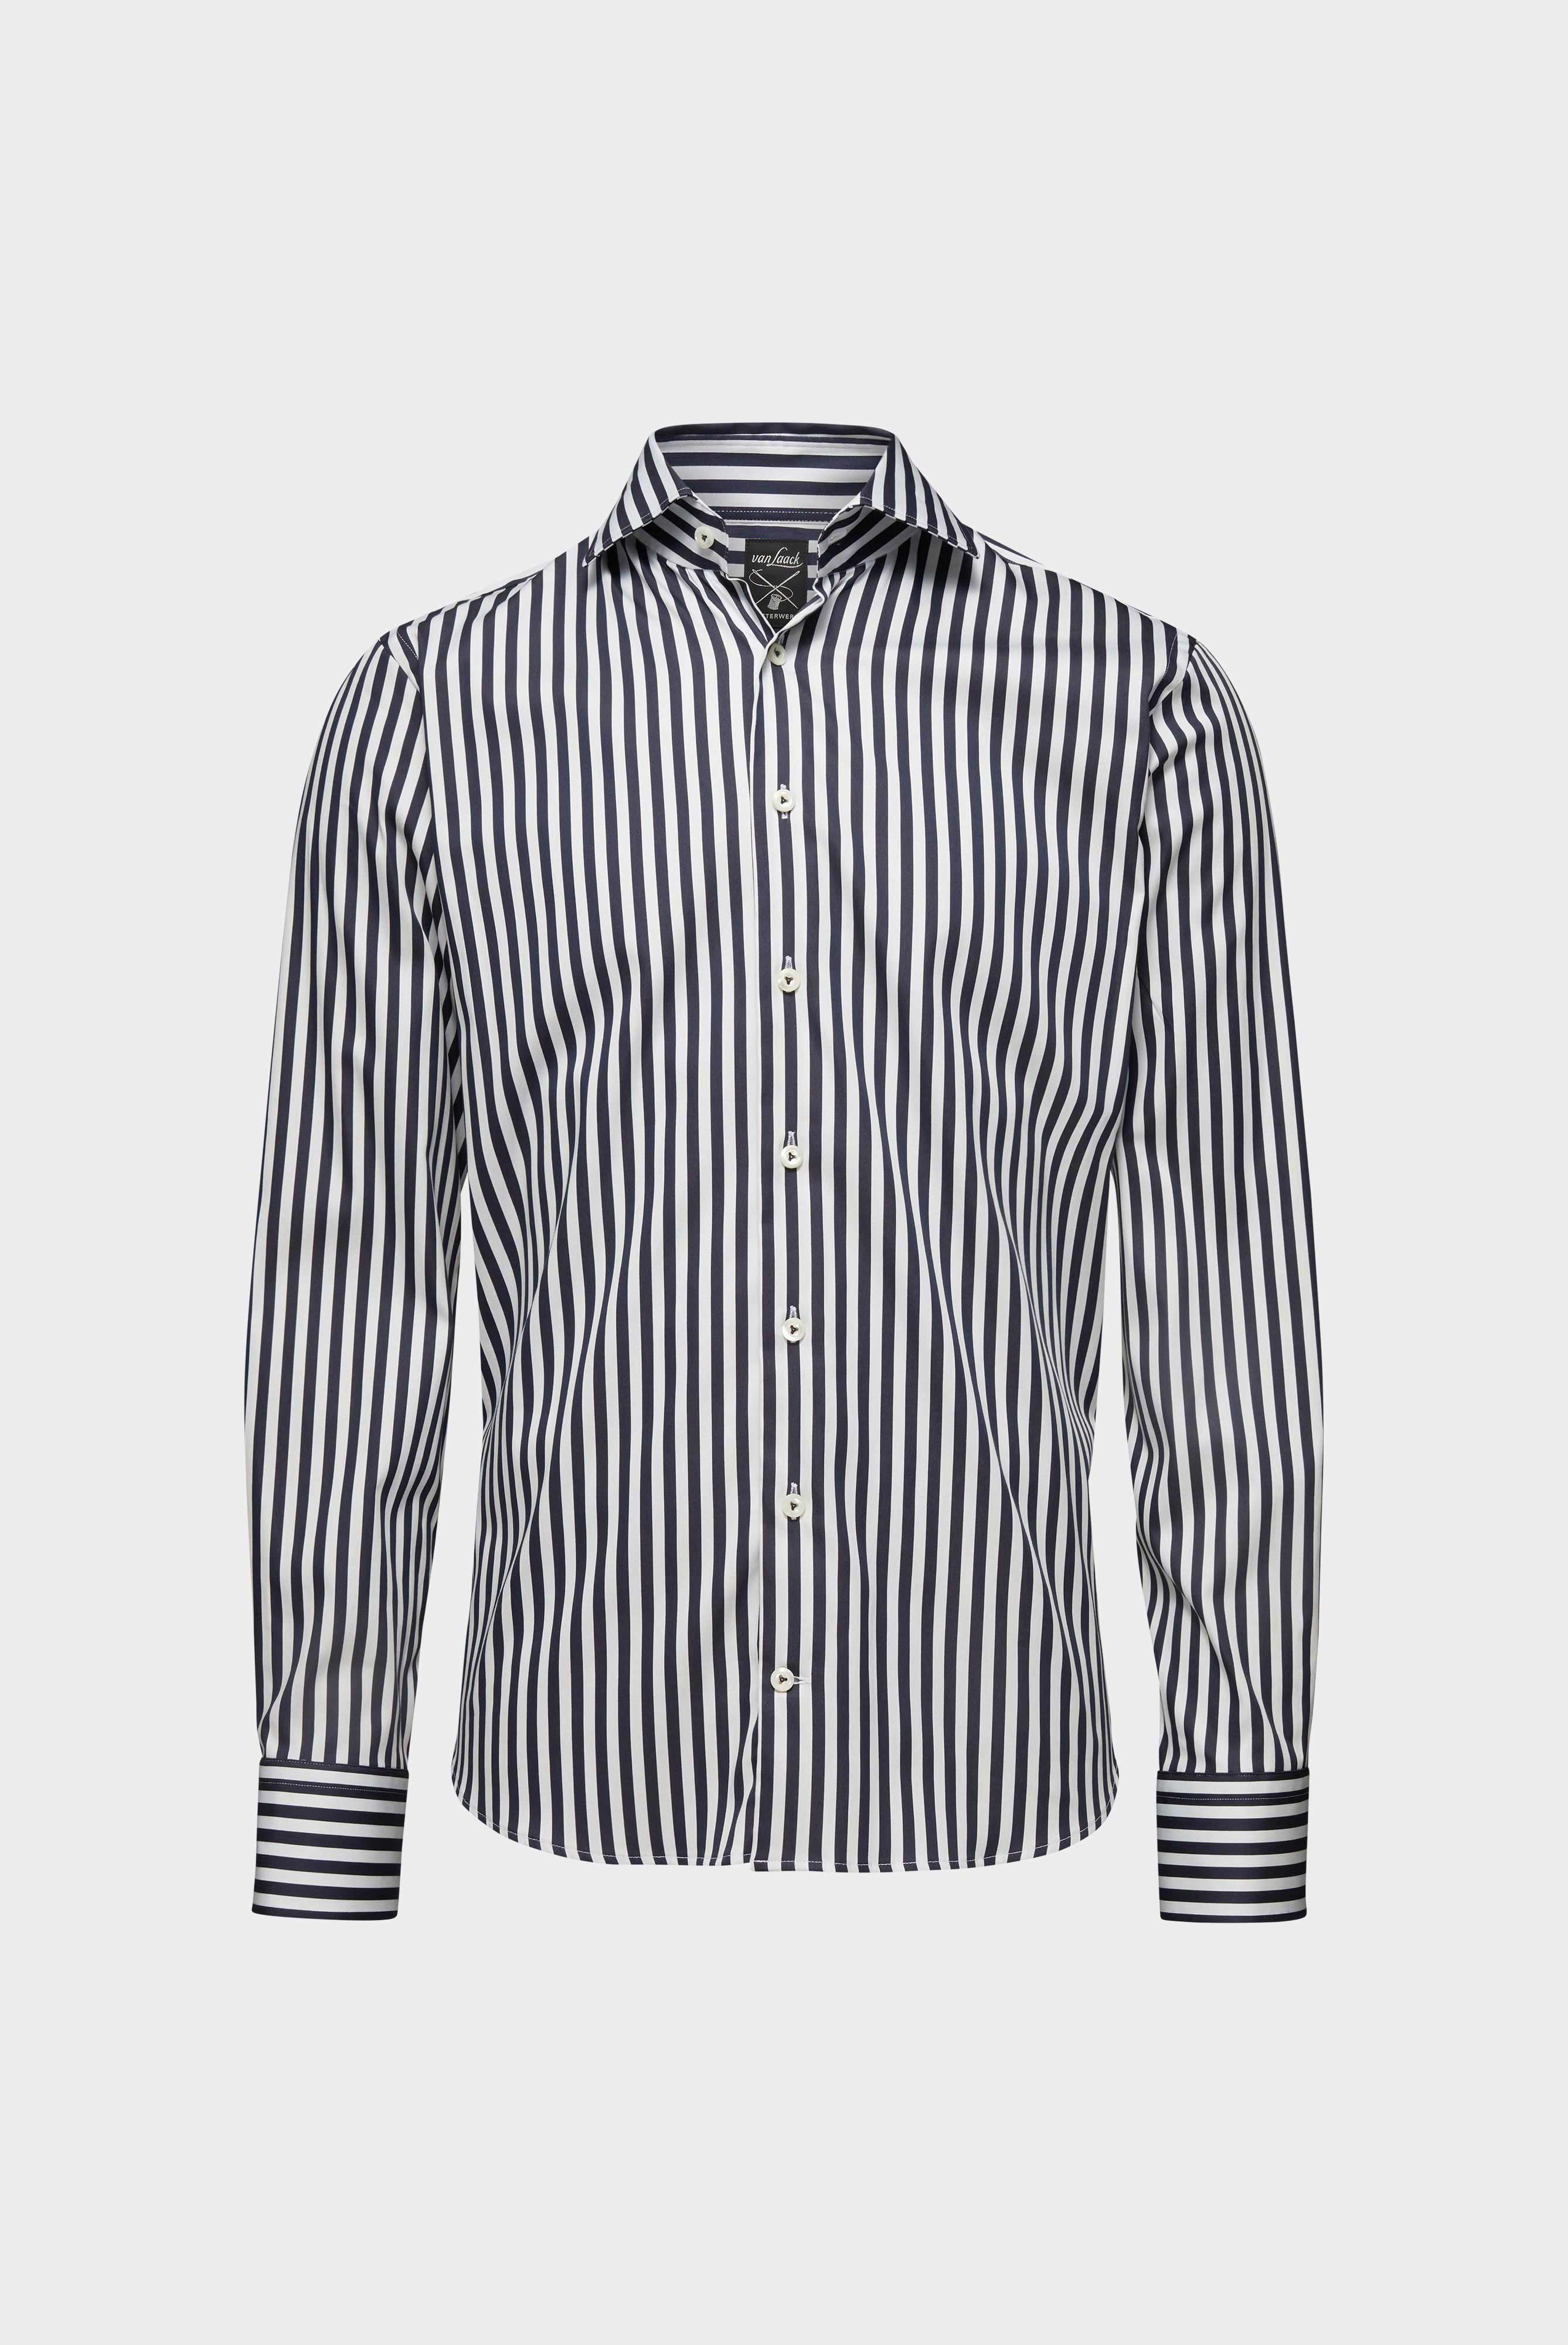 Casual Shirts+Striped Shirt in Cotton Stretch Tailor Fit+20.3283.NV.171959.790.38